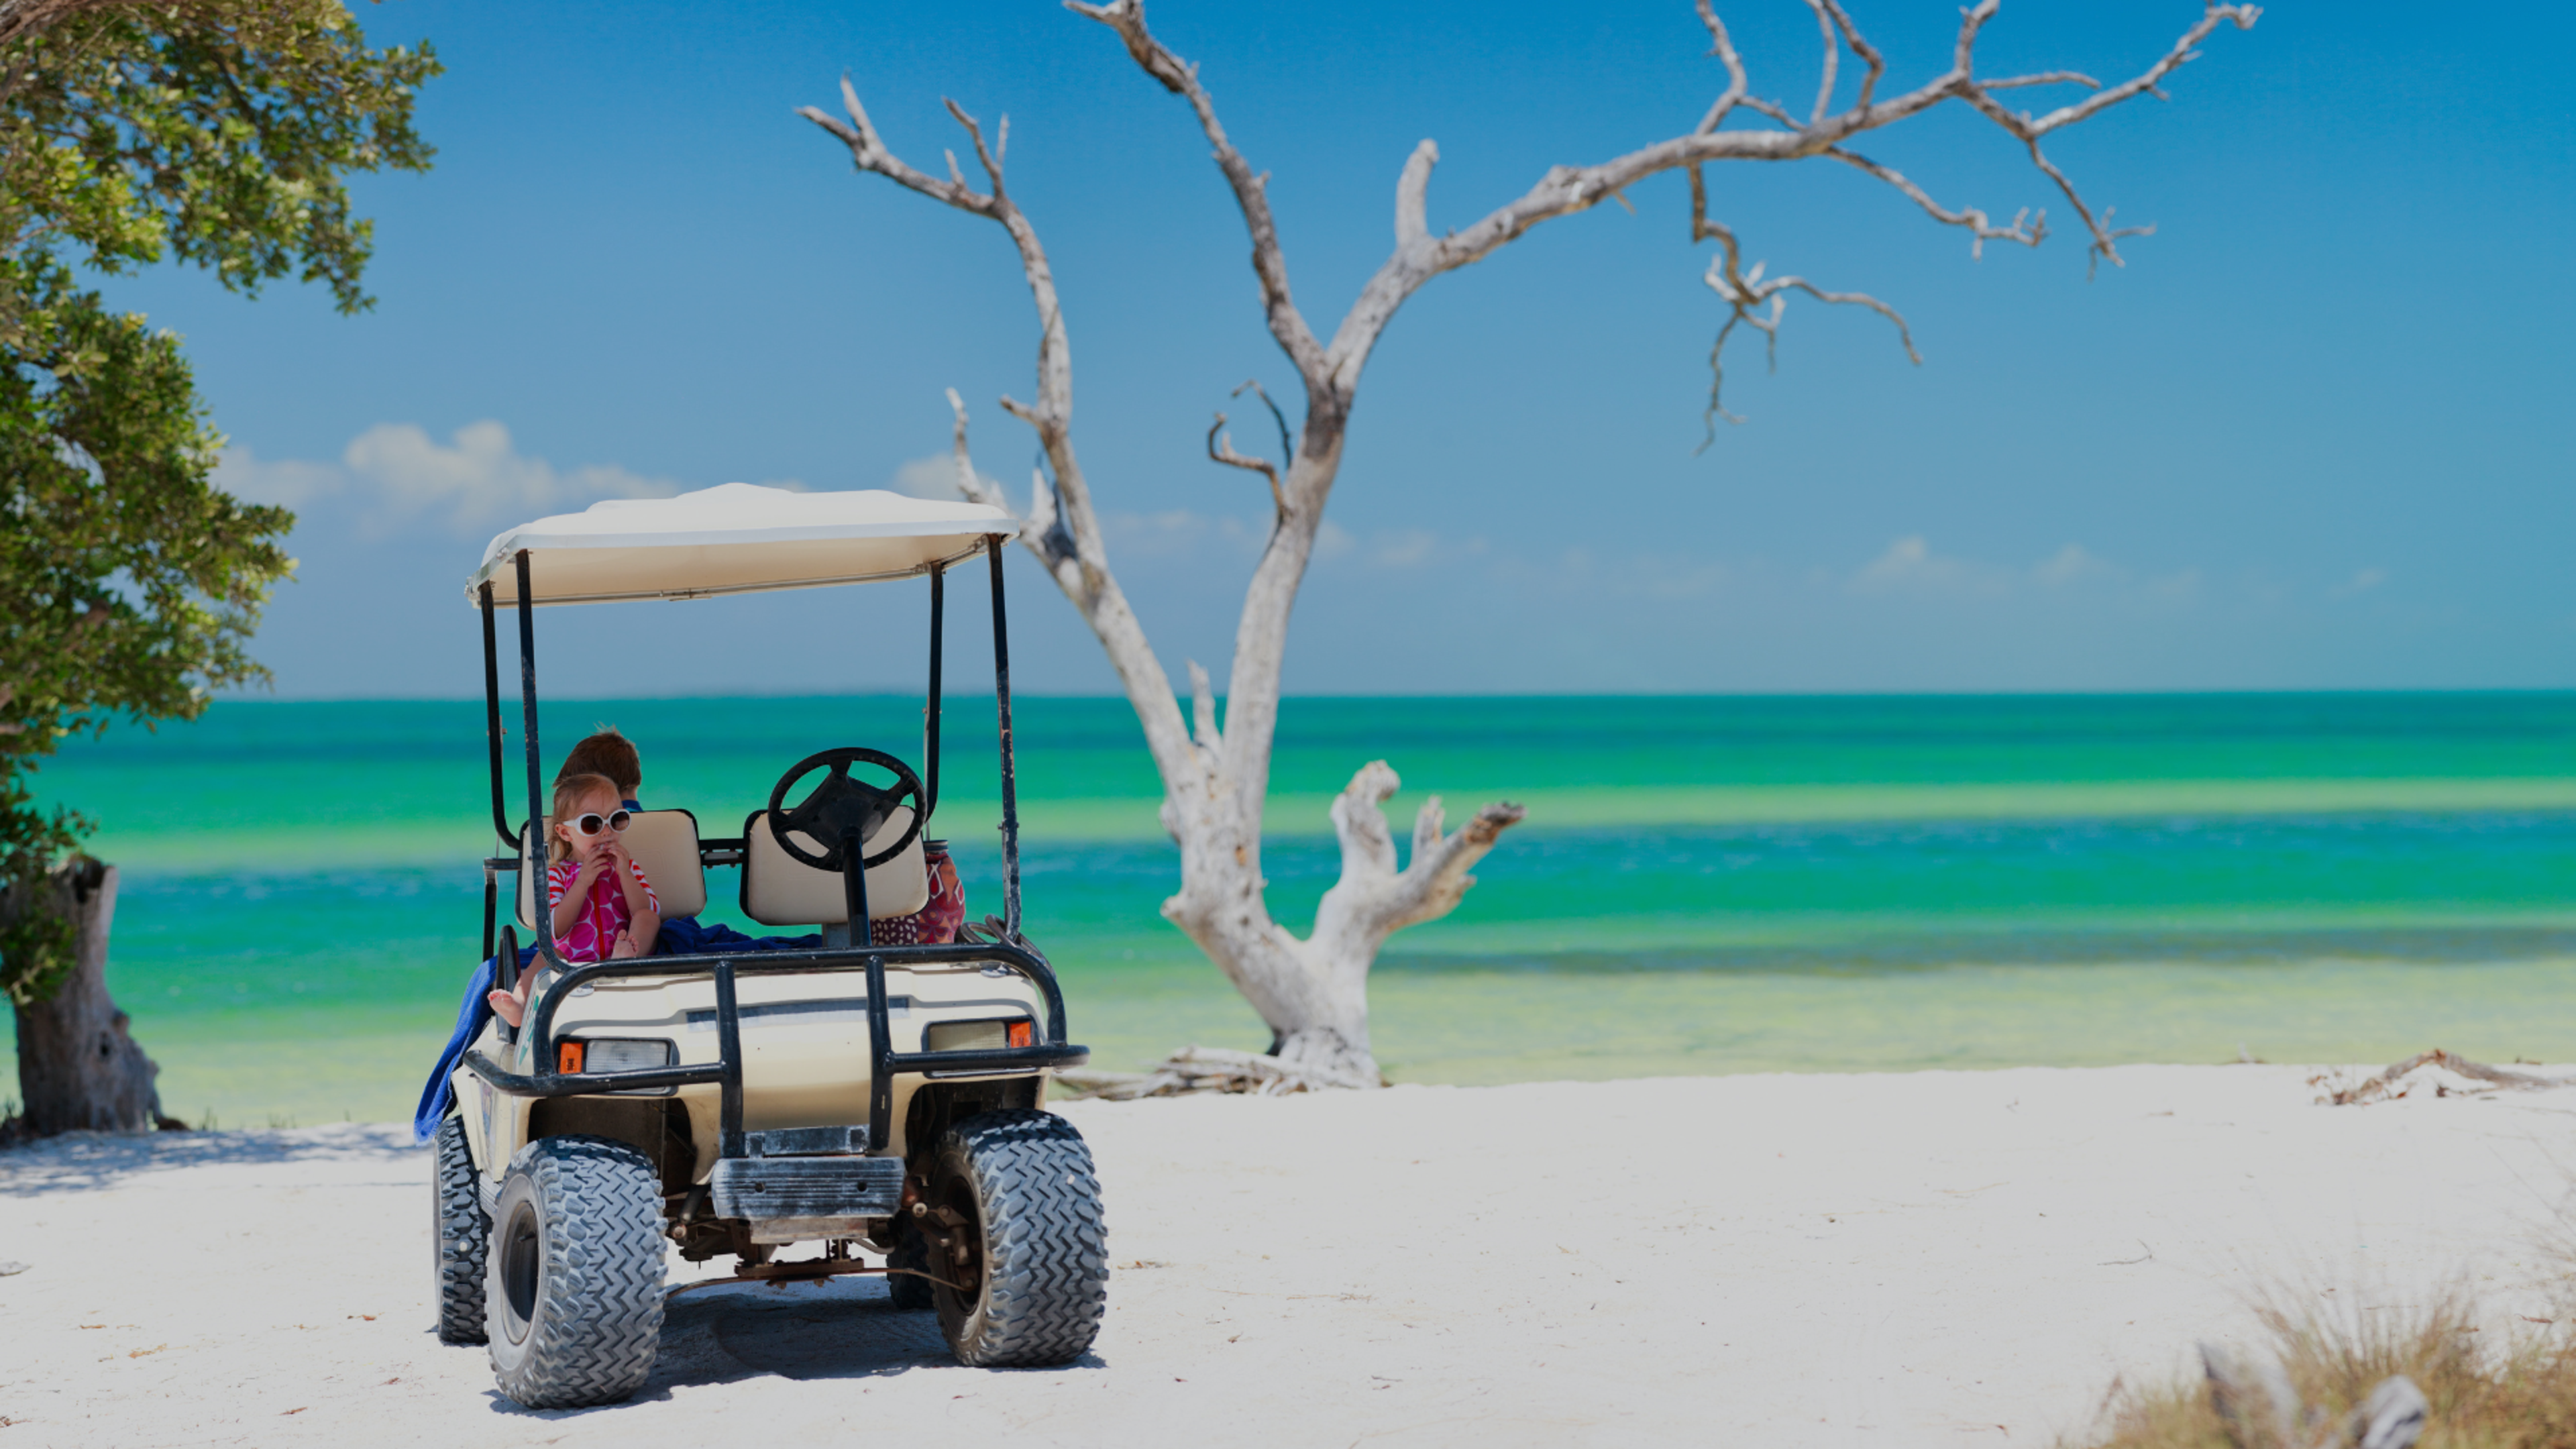 Experience adventure and freedom at Lifestyle Centre - Hervey Bay